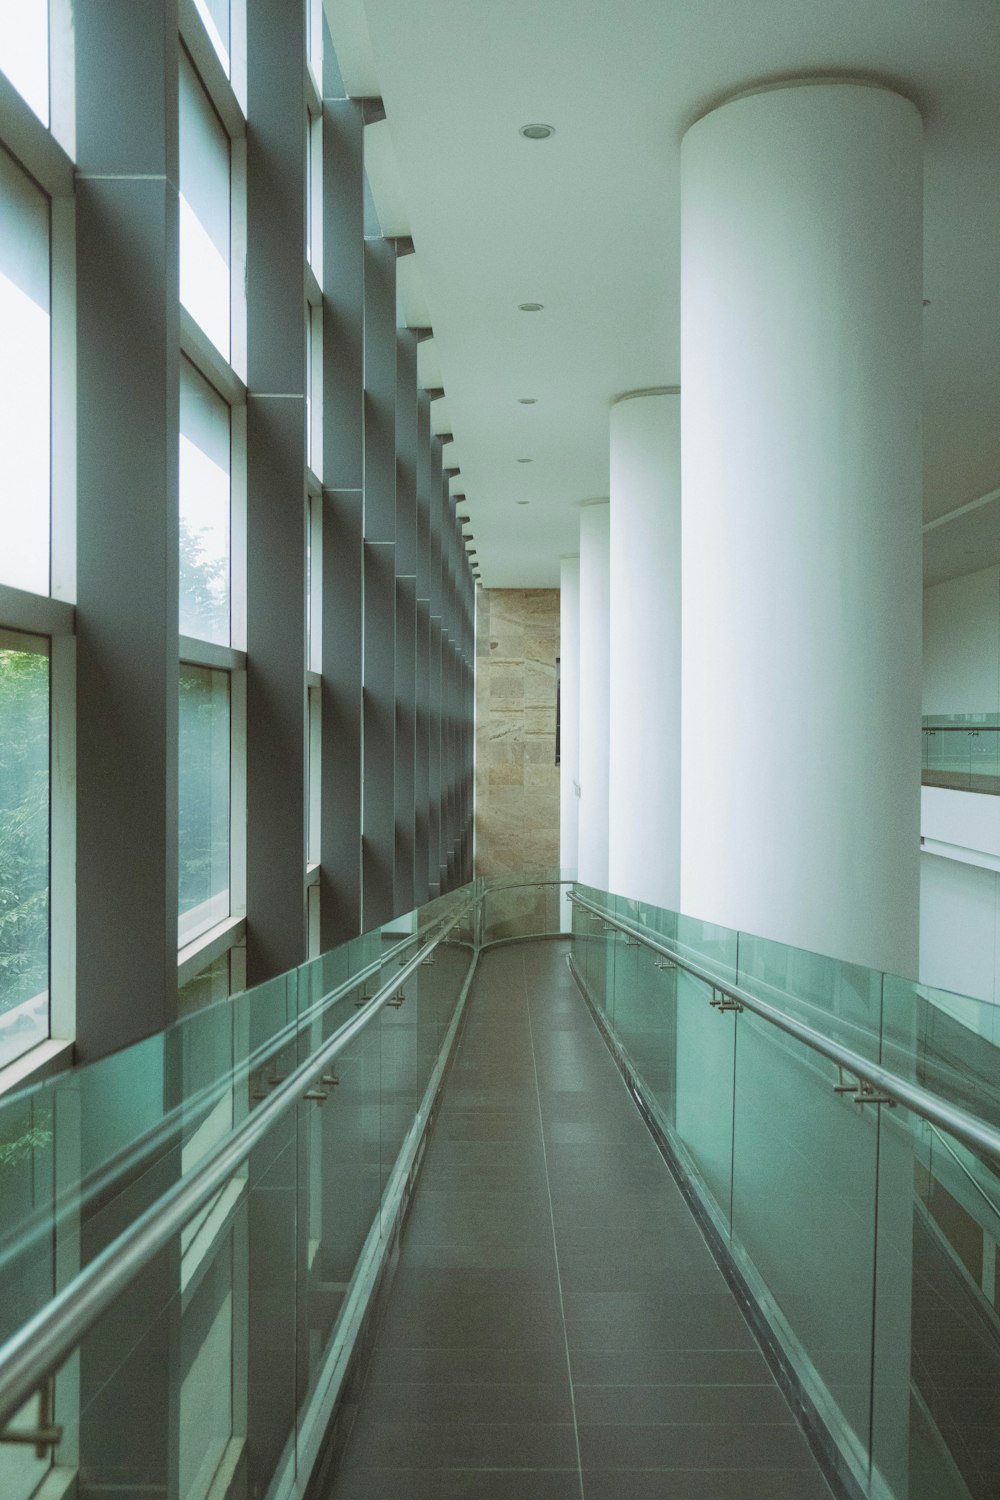 a long hallway with glass railings and windows